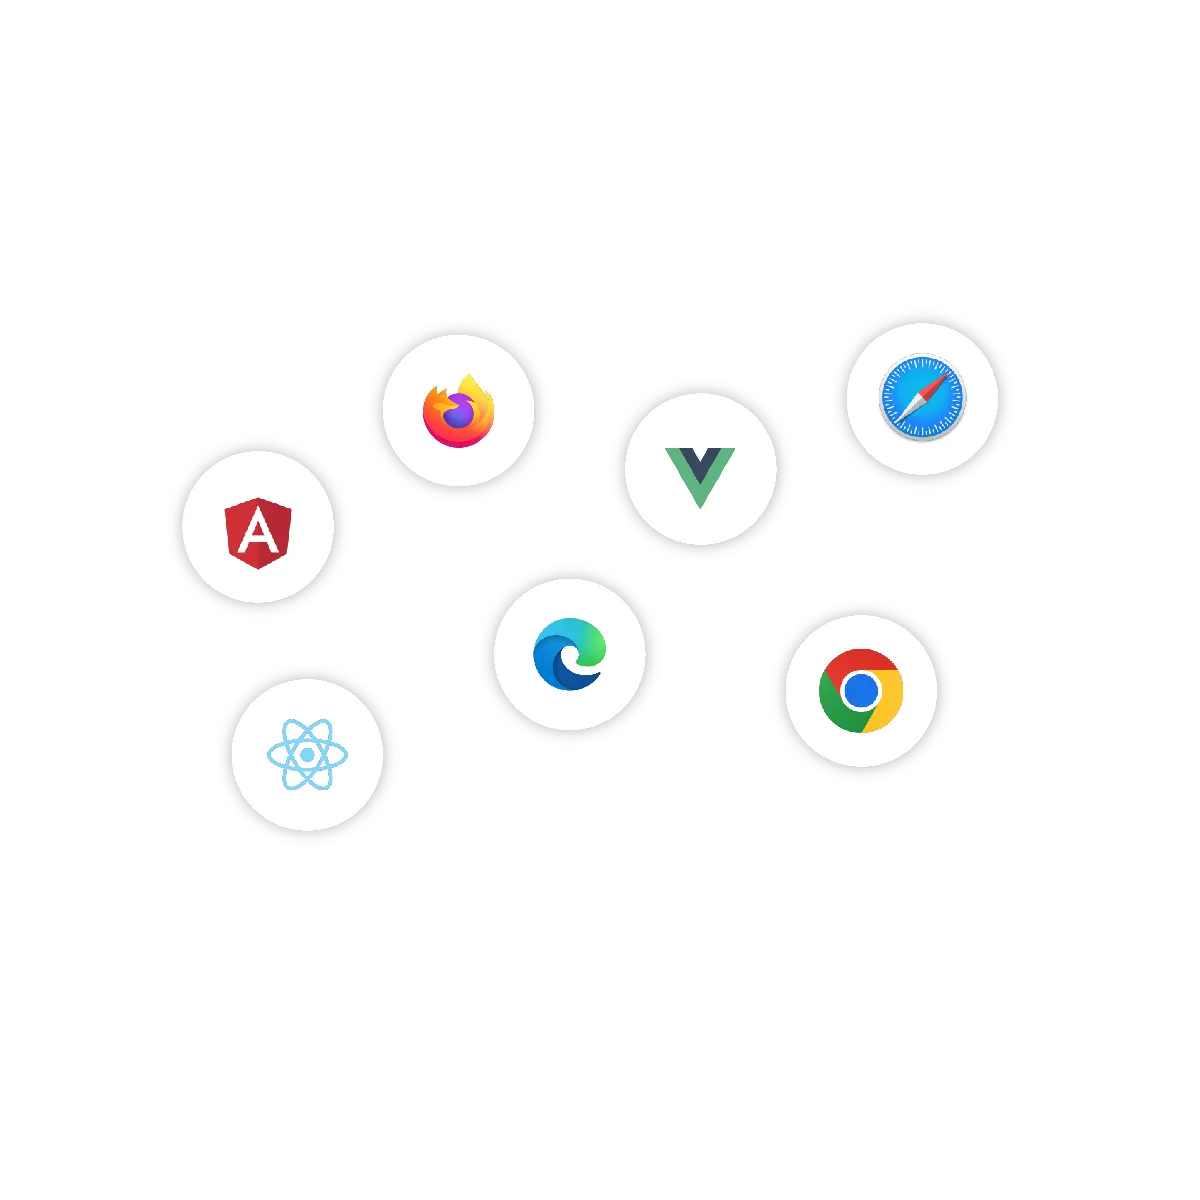 Bubbles with frontend development language icons written on them